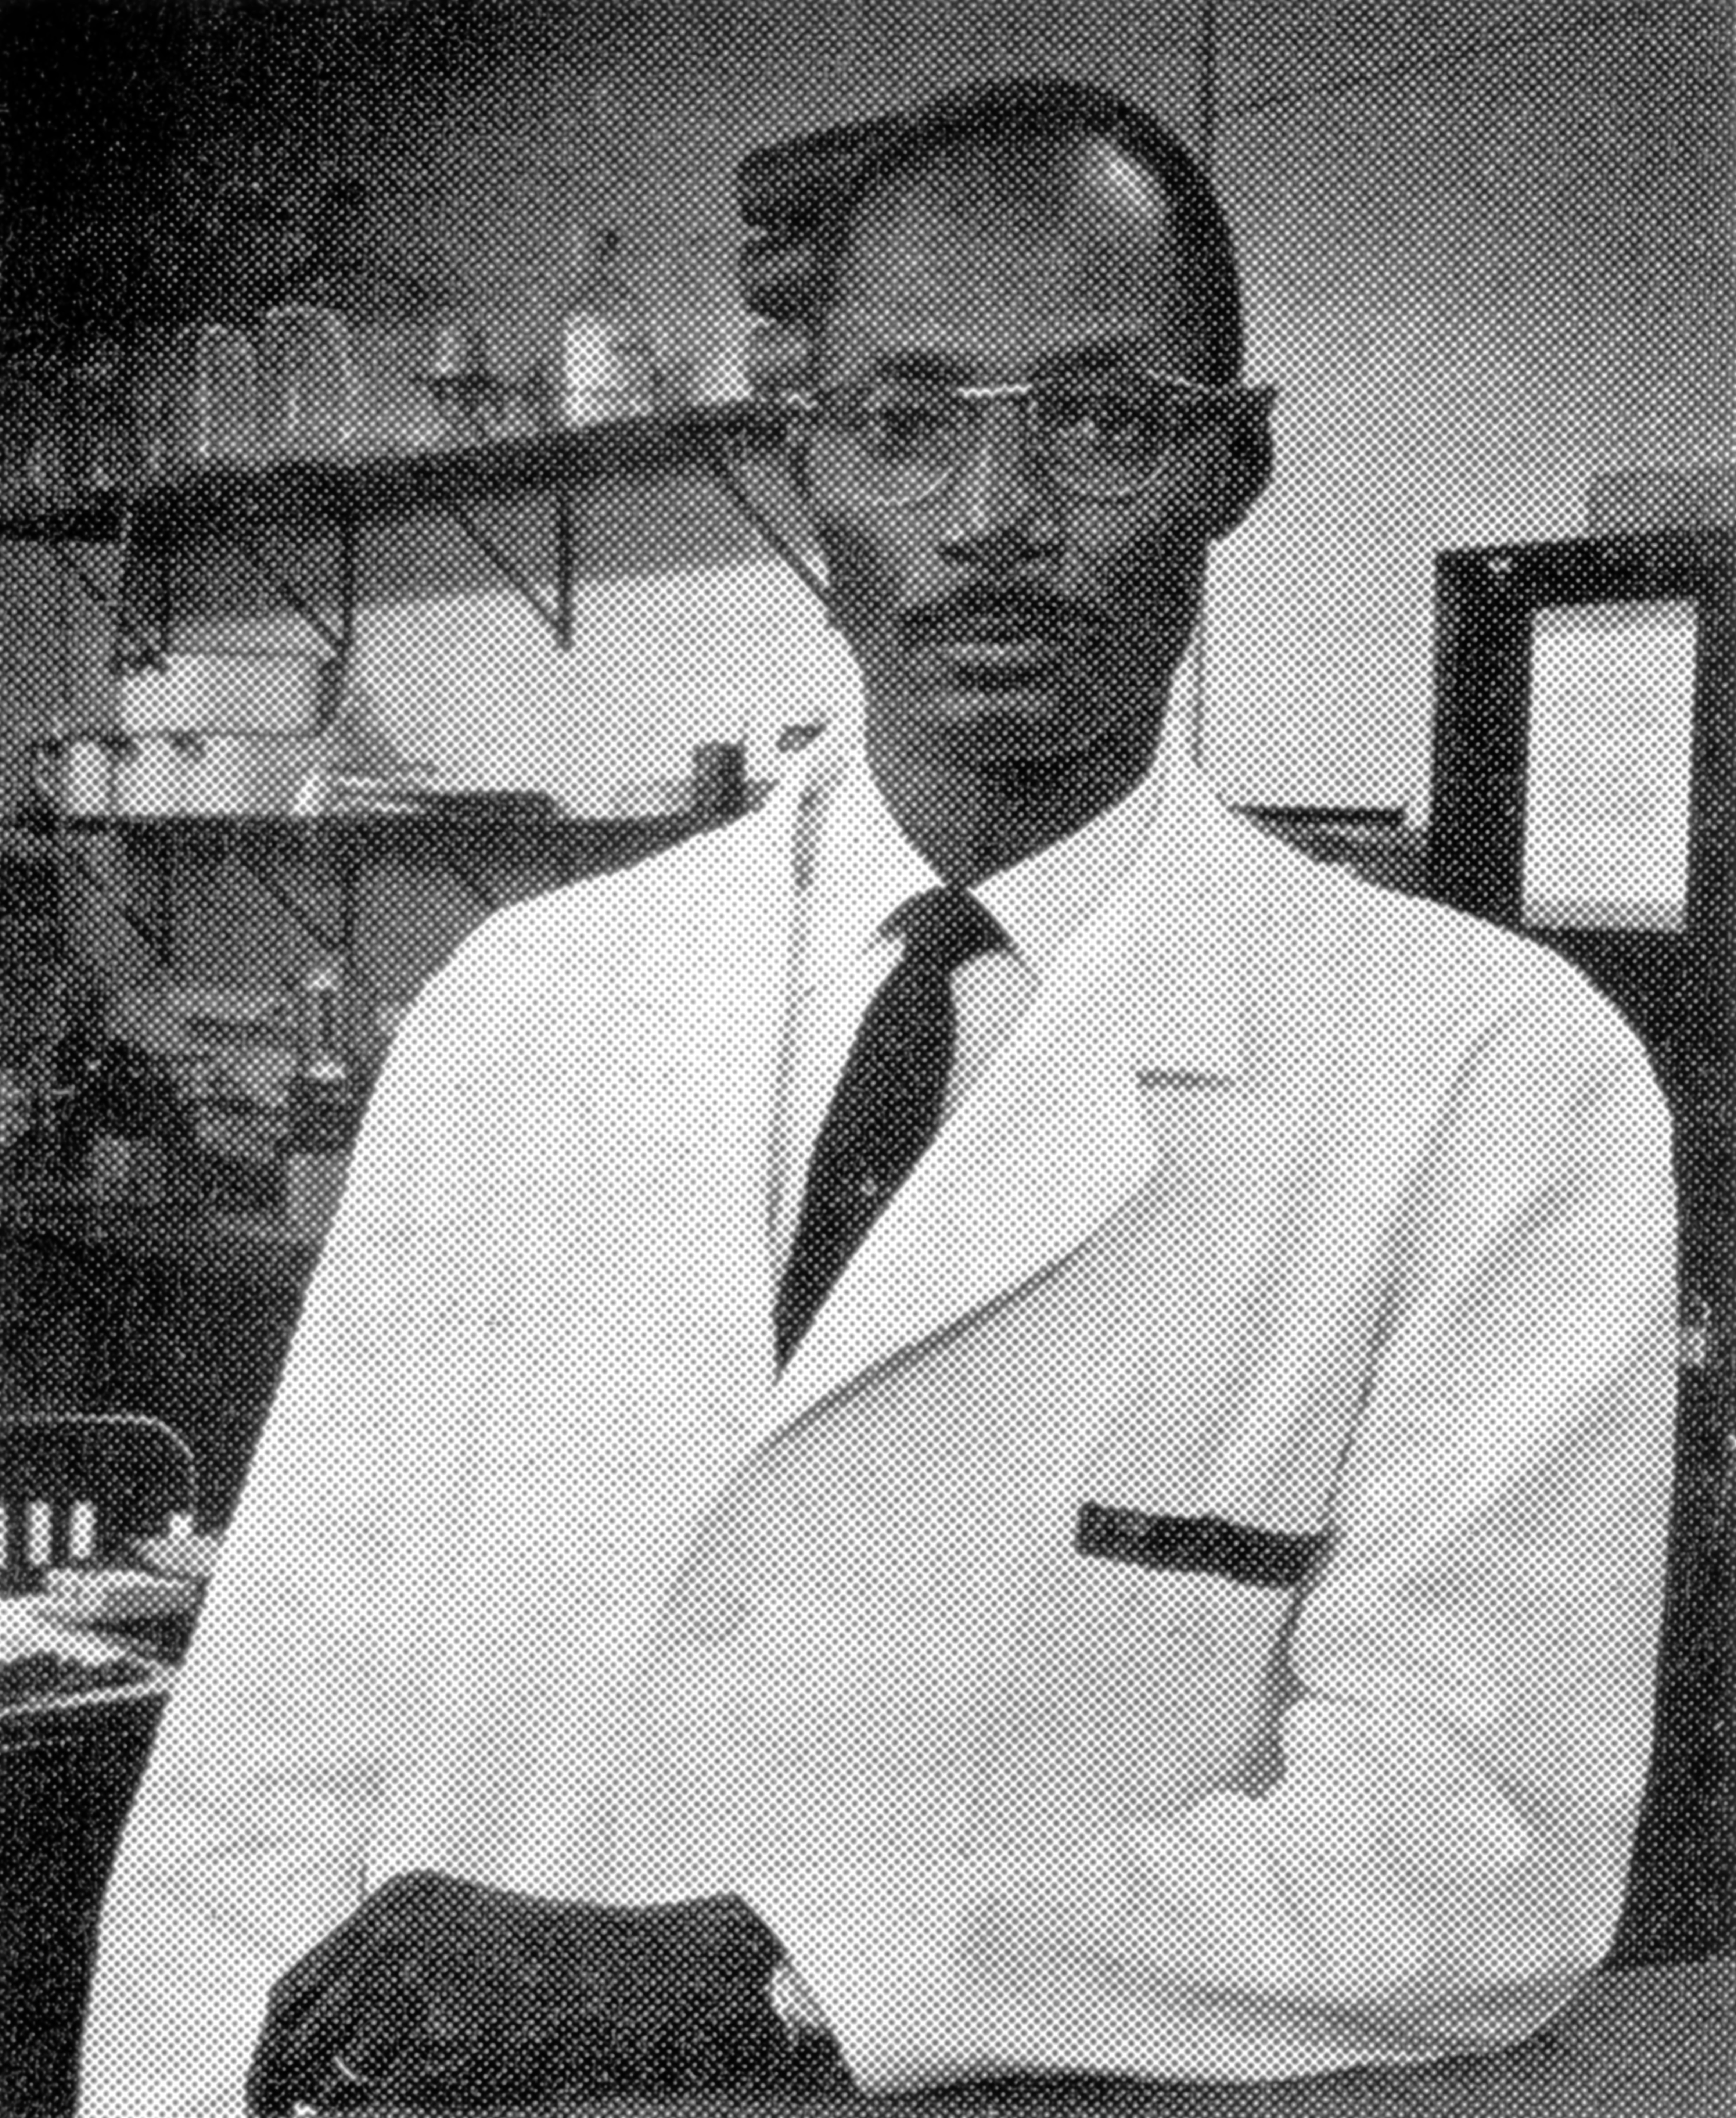 a photo of George Rusten scanned from the NIH Record, wearing glasses and a white lab coat